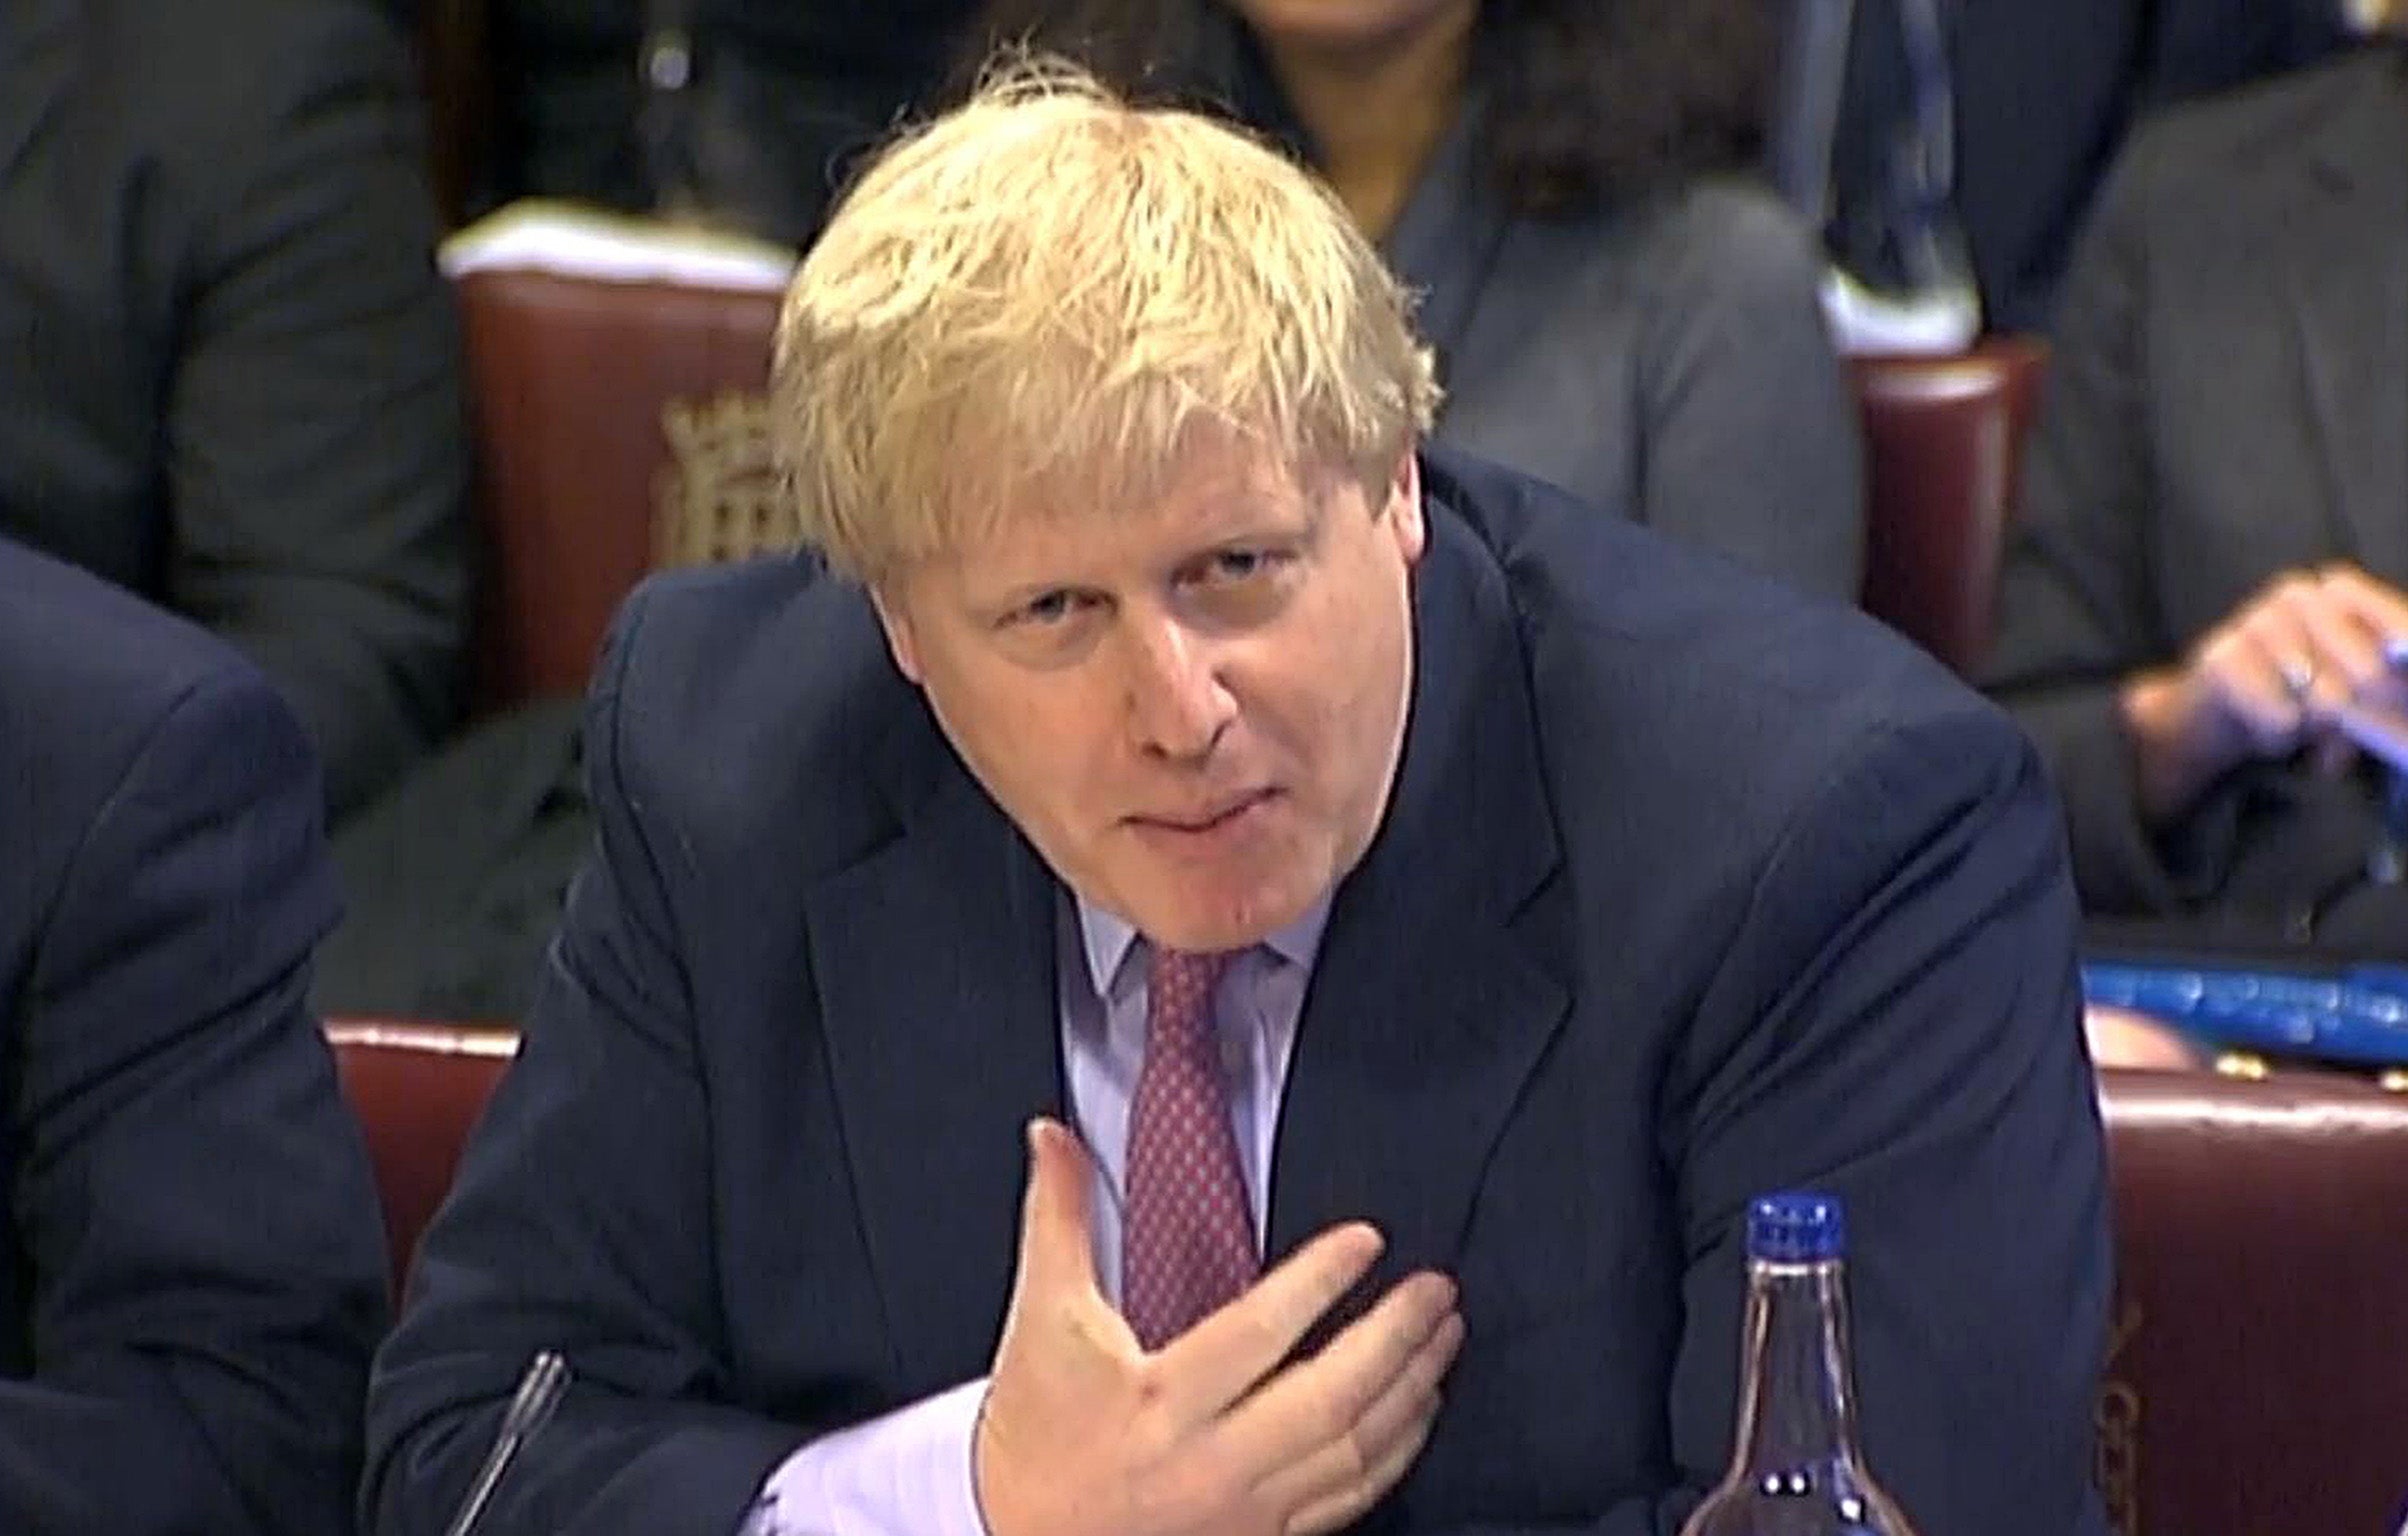 Boris Johnson would not be drawn on Mr Trump's refugee policies